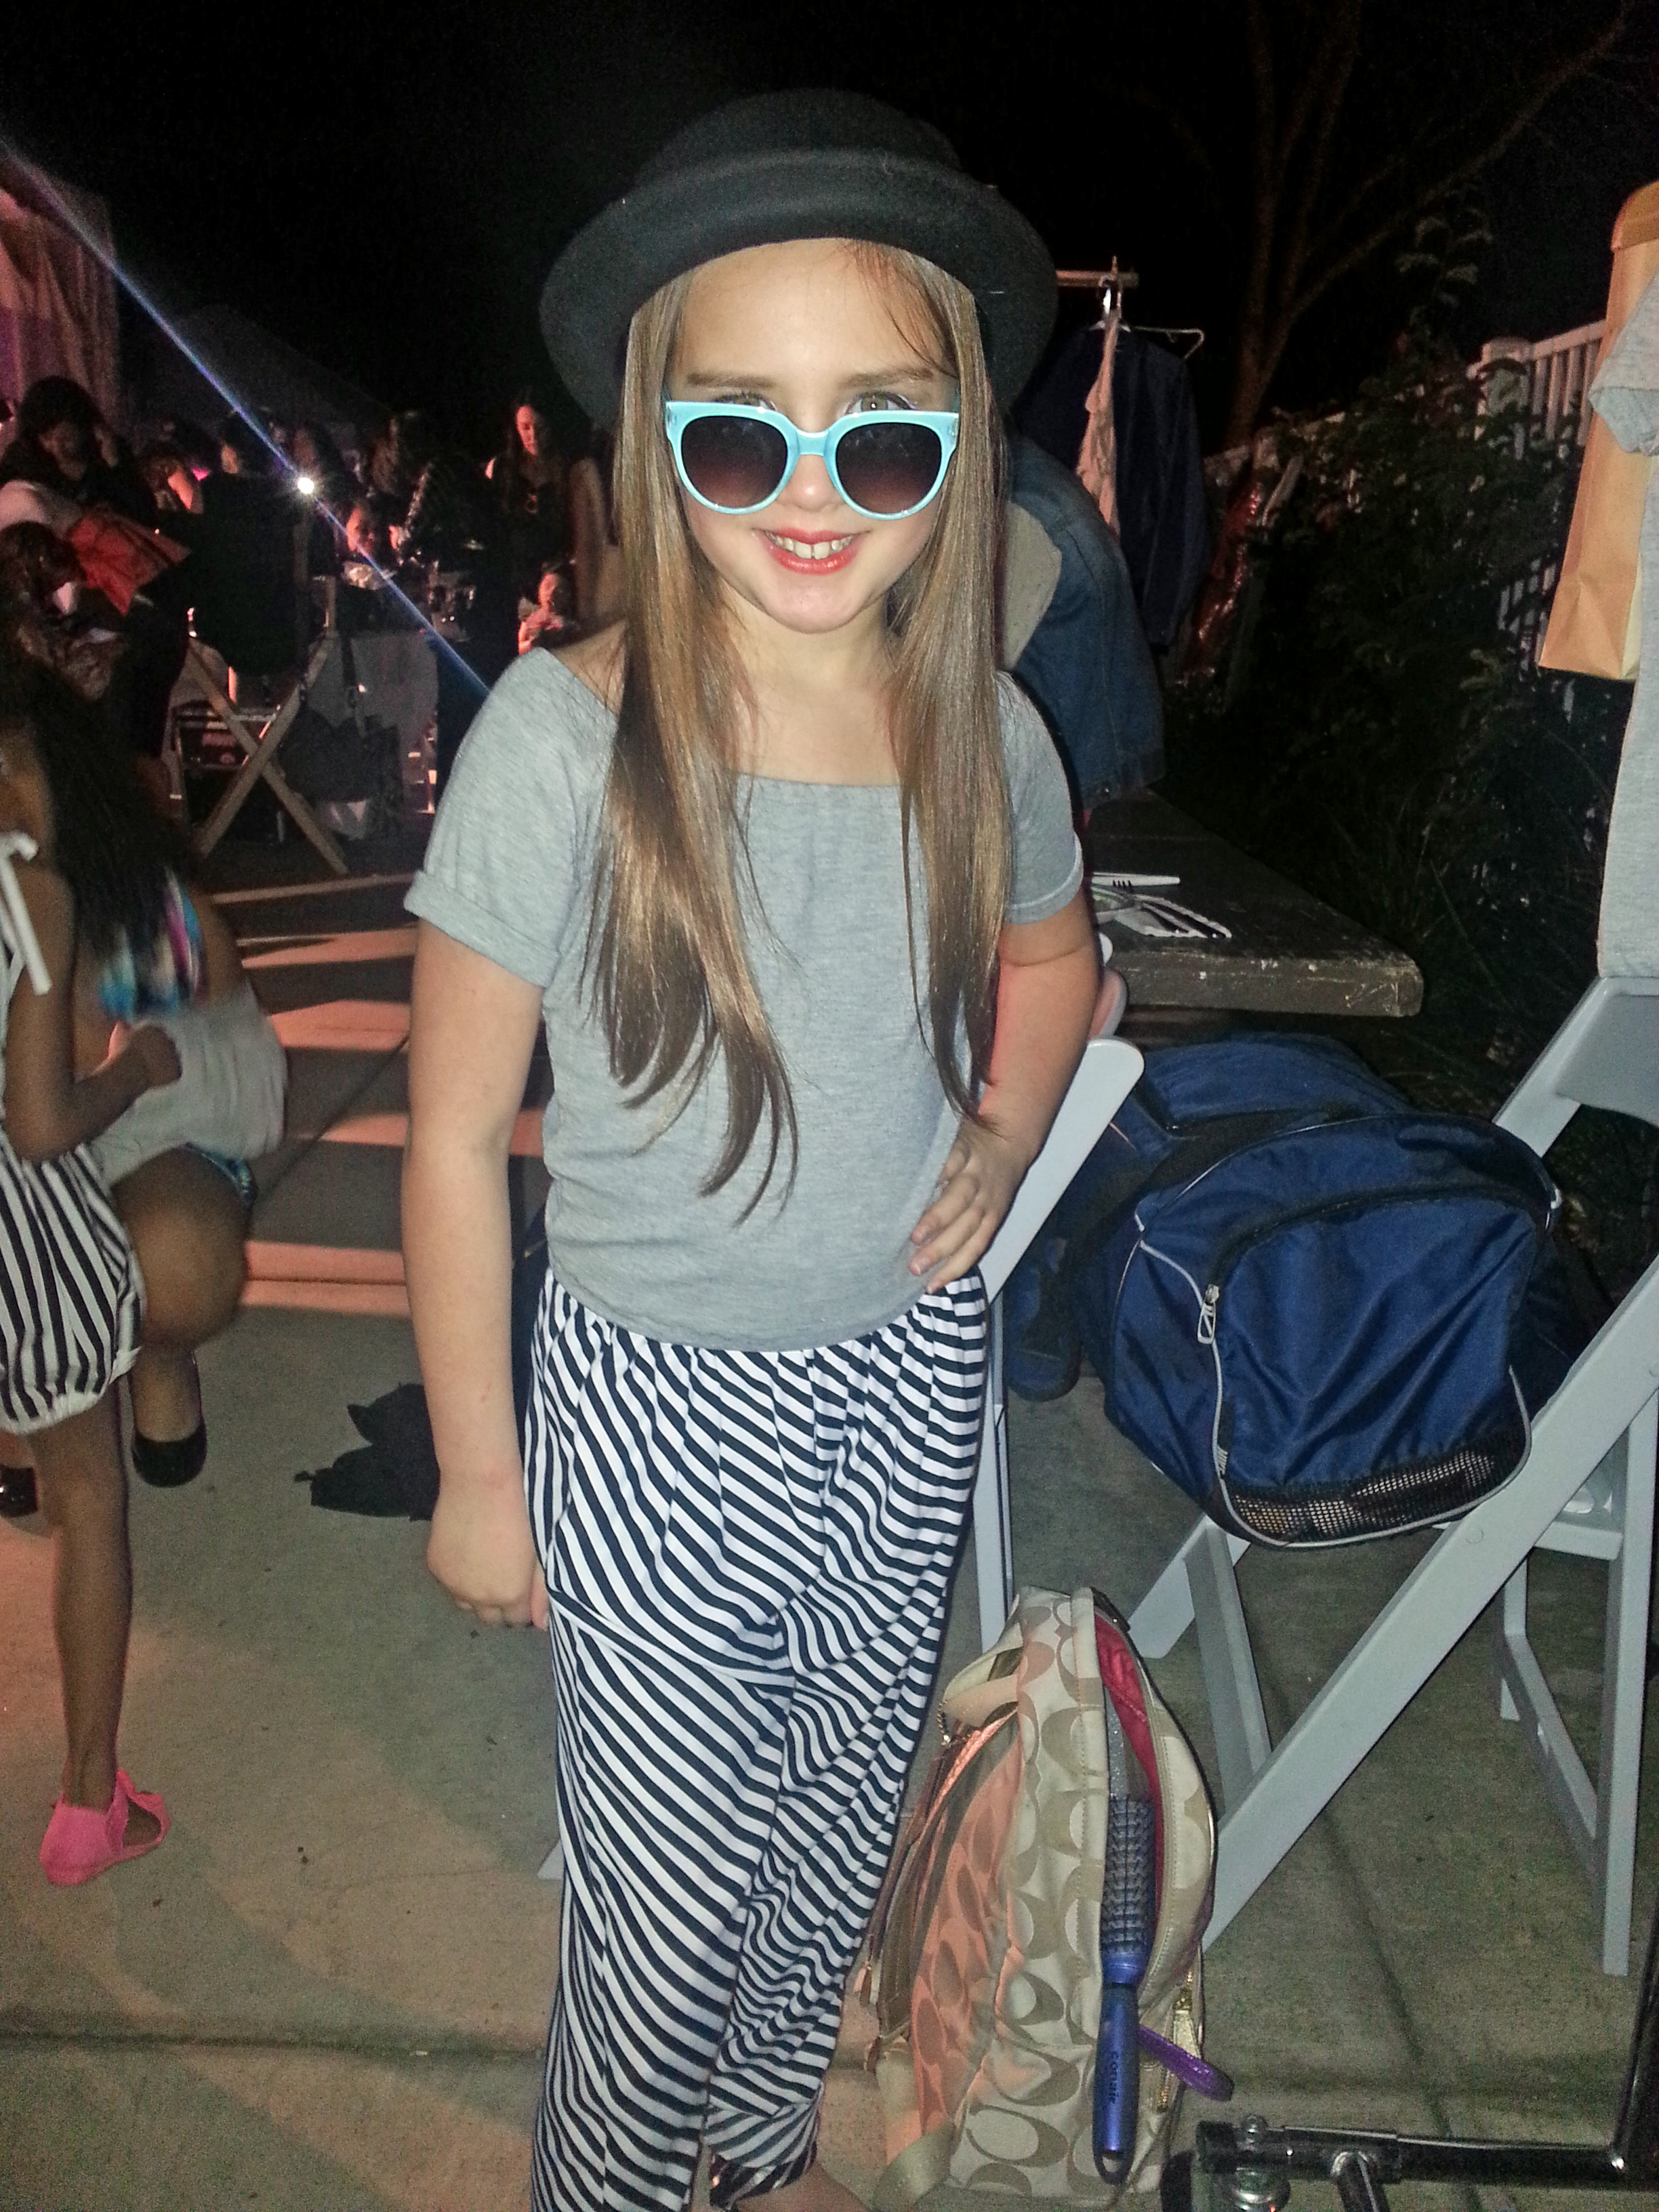 Hannah modeling an outfit from Sweet Threads at the Long Beach Fashion Show